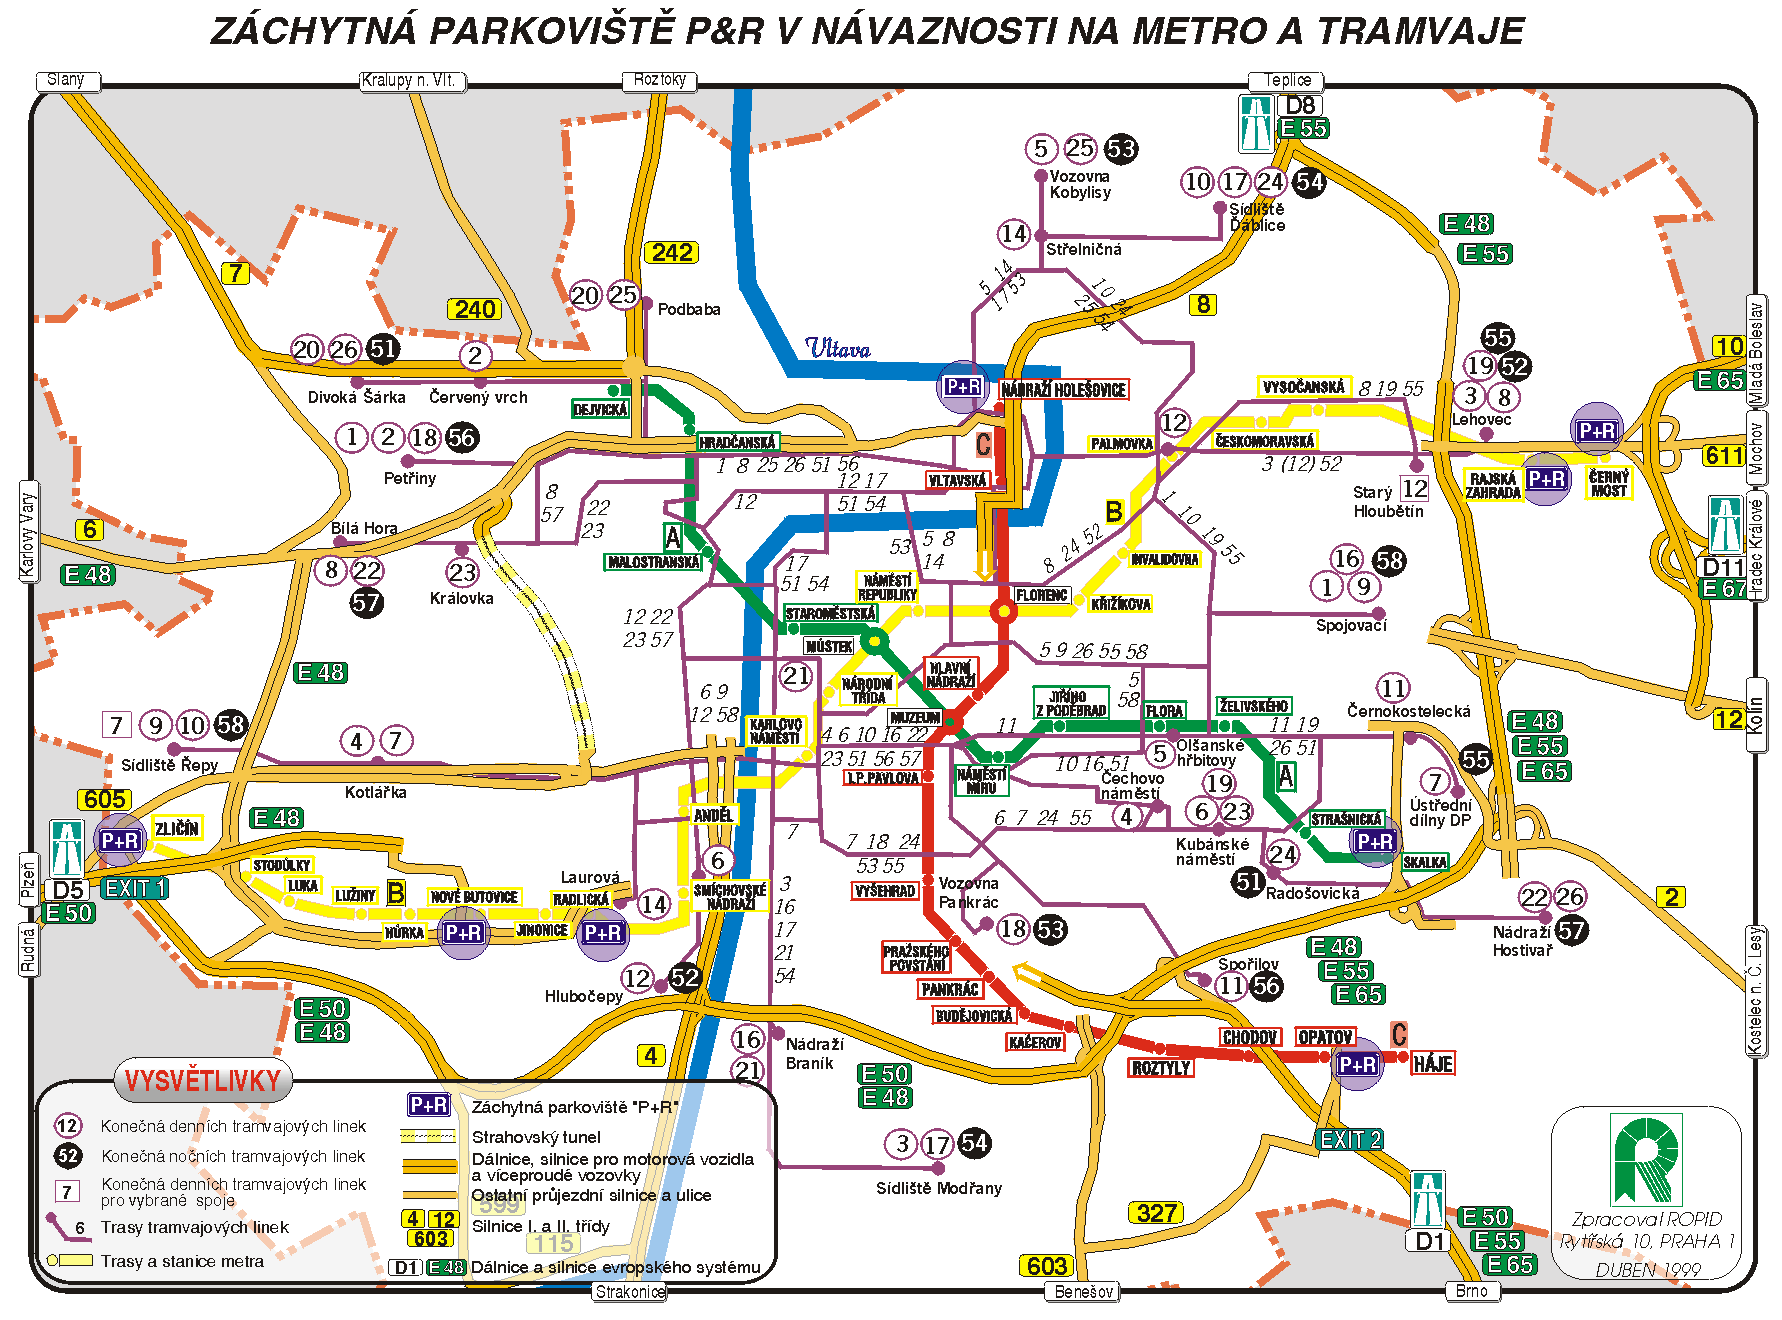 map of park+ride parking facilities [147kb]